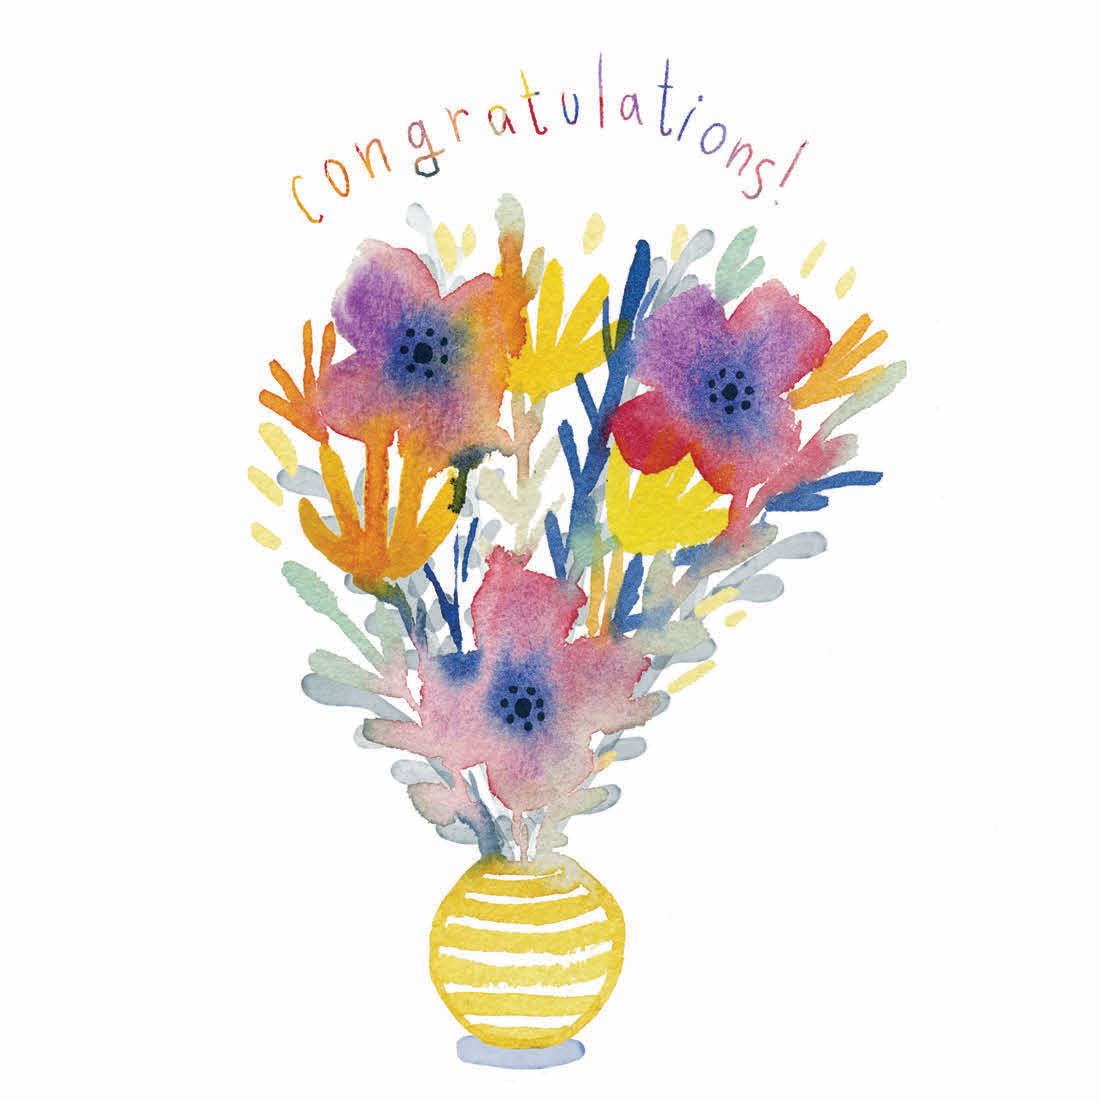 NUOVO - "CONGRATULATIONS BOUQUET" GREETING CARD